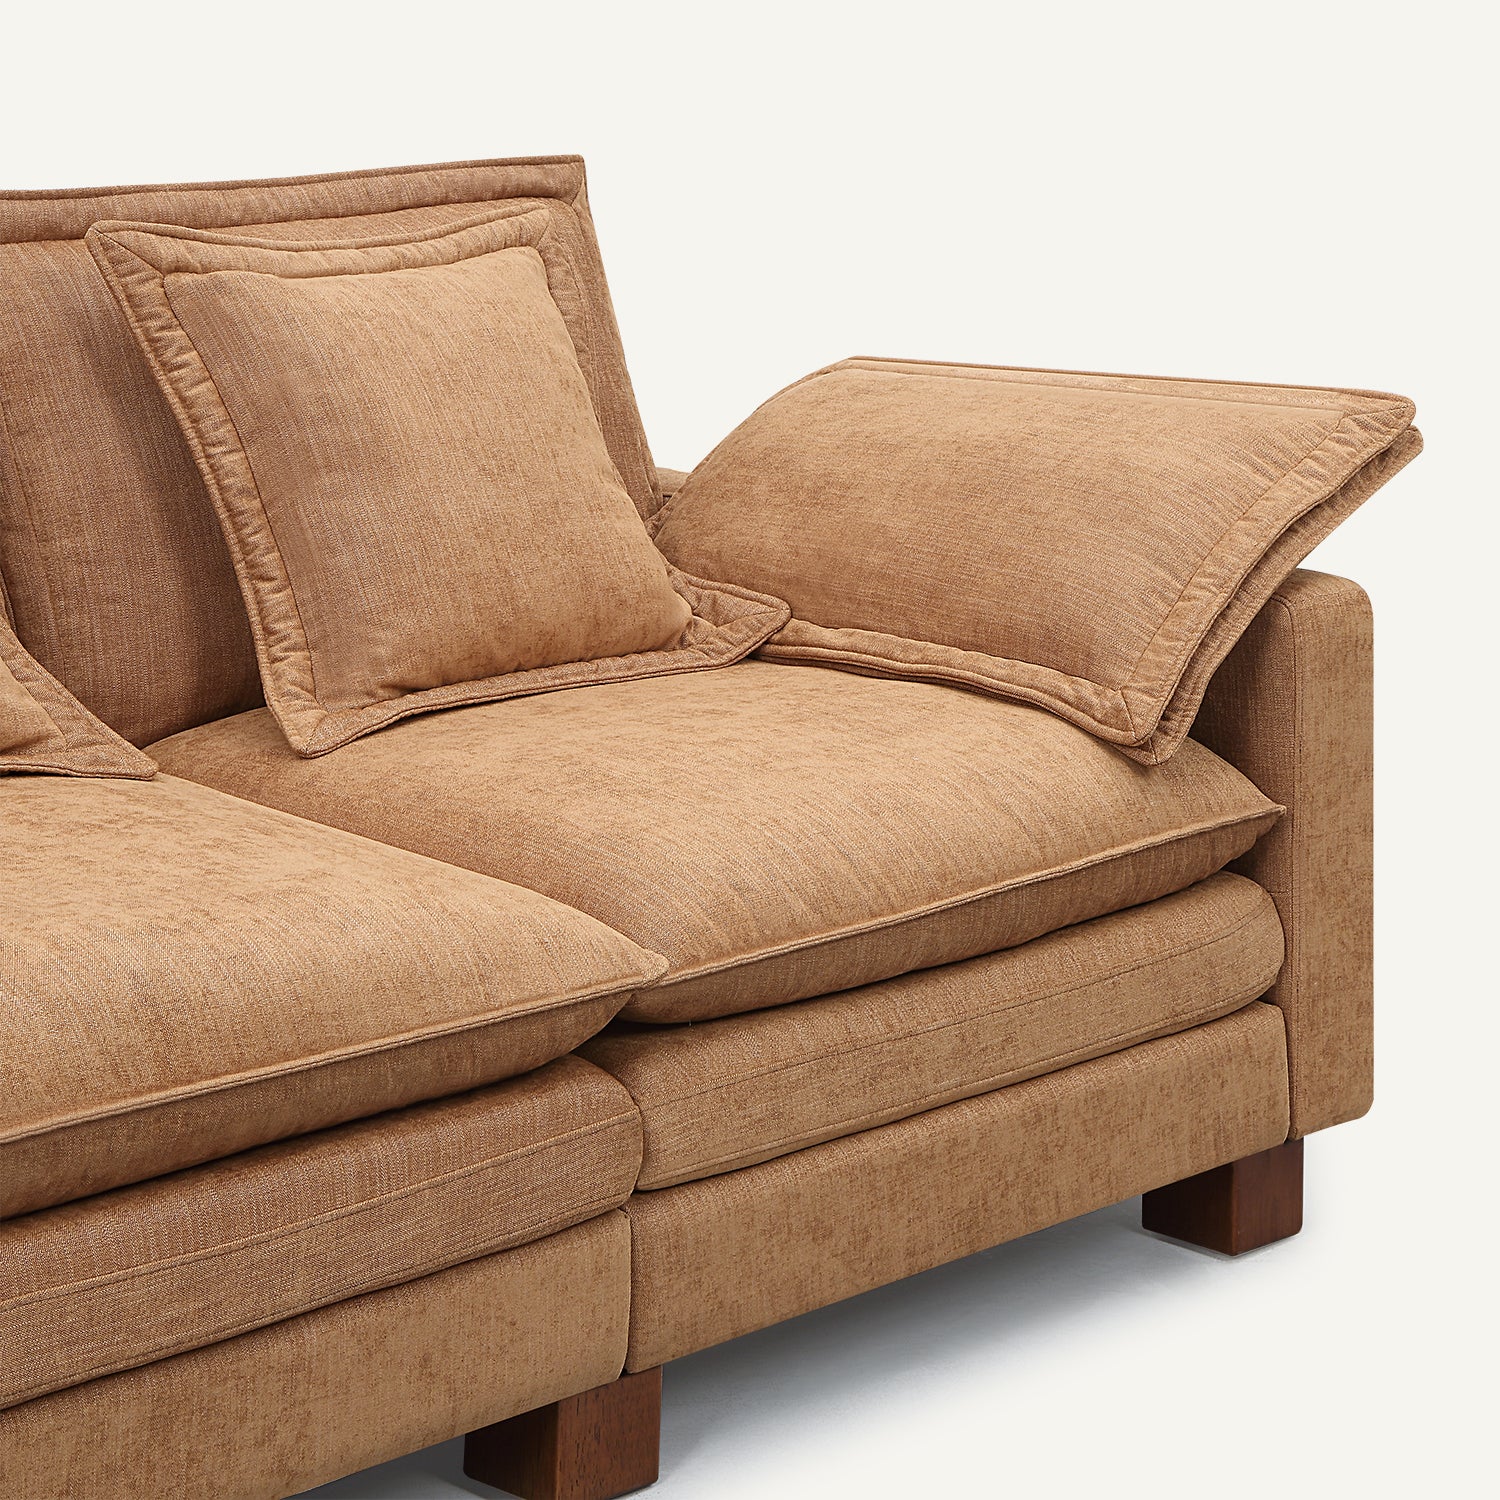 Stacked Tan Linen 5-Seat Corner Sectional